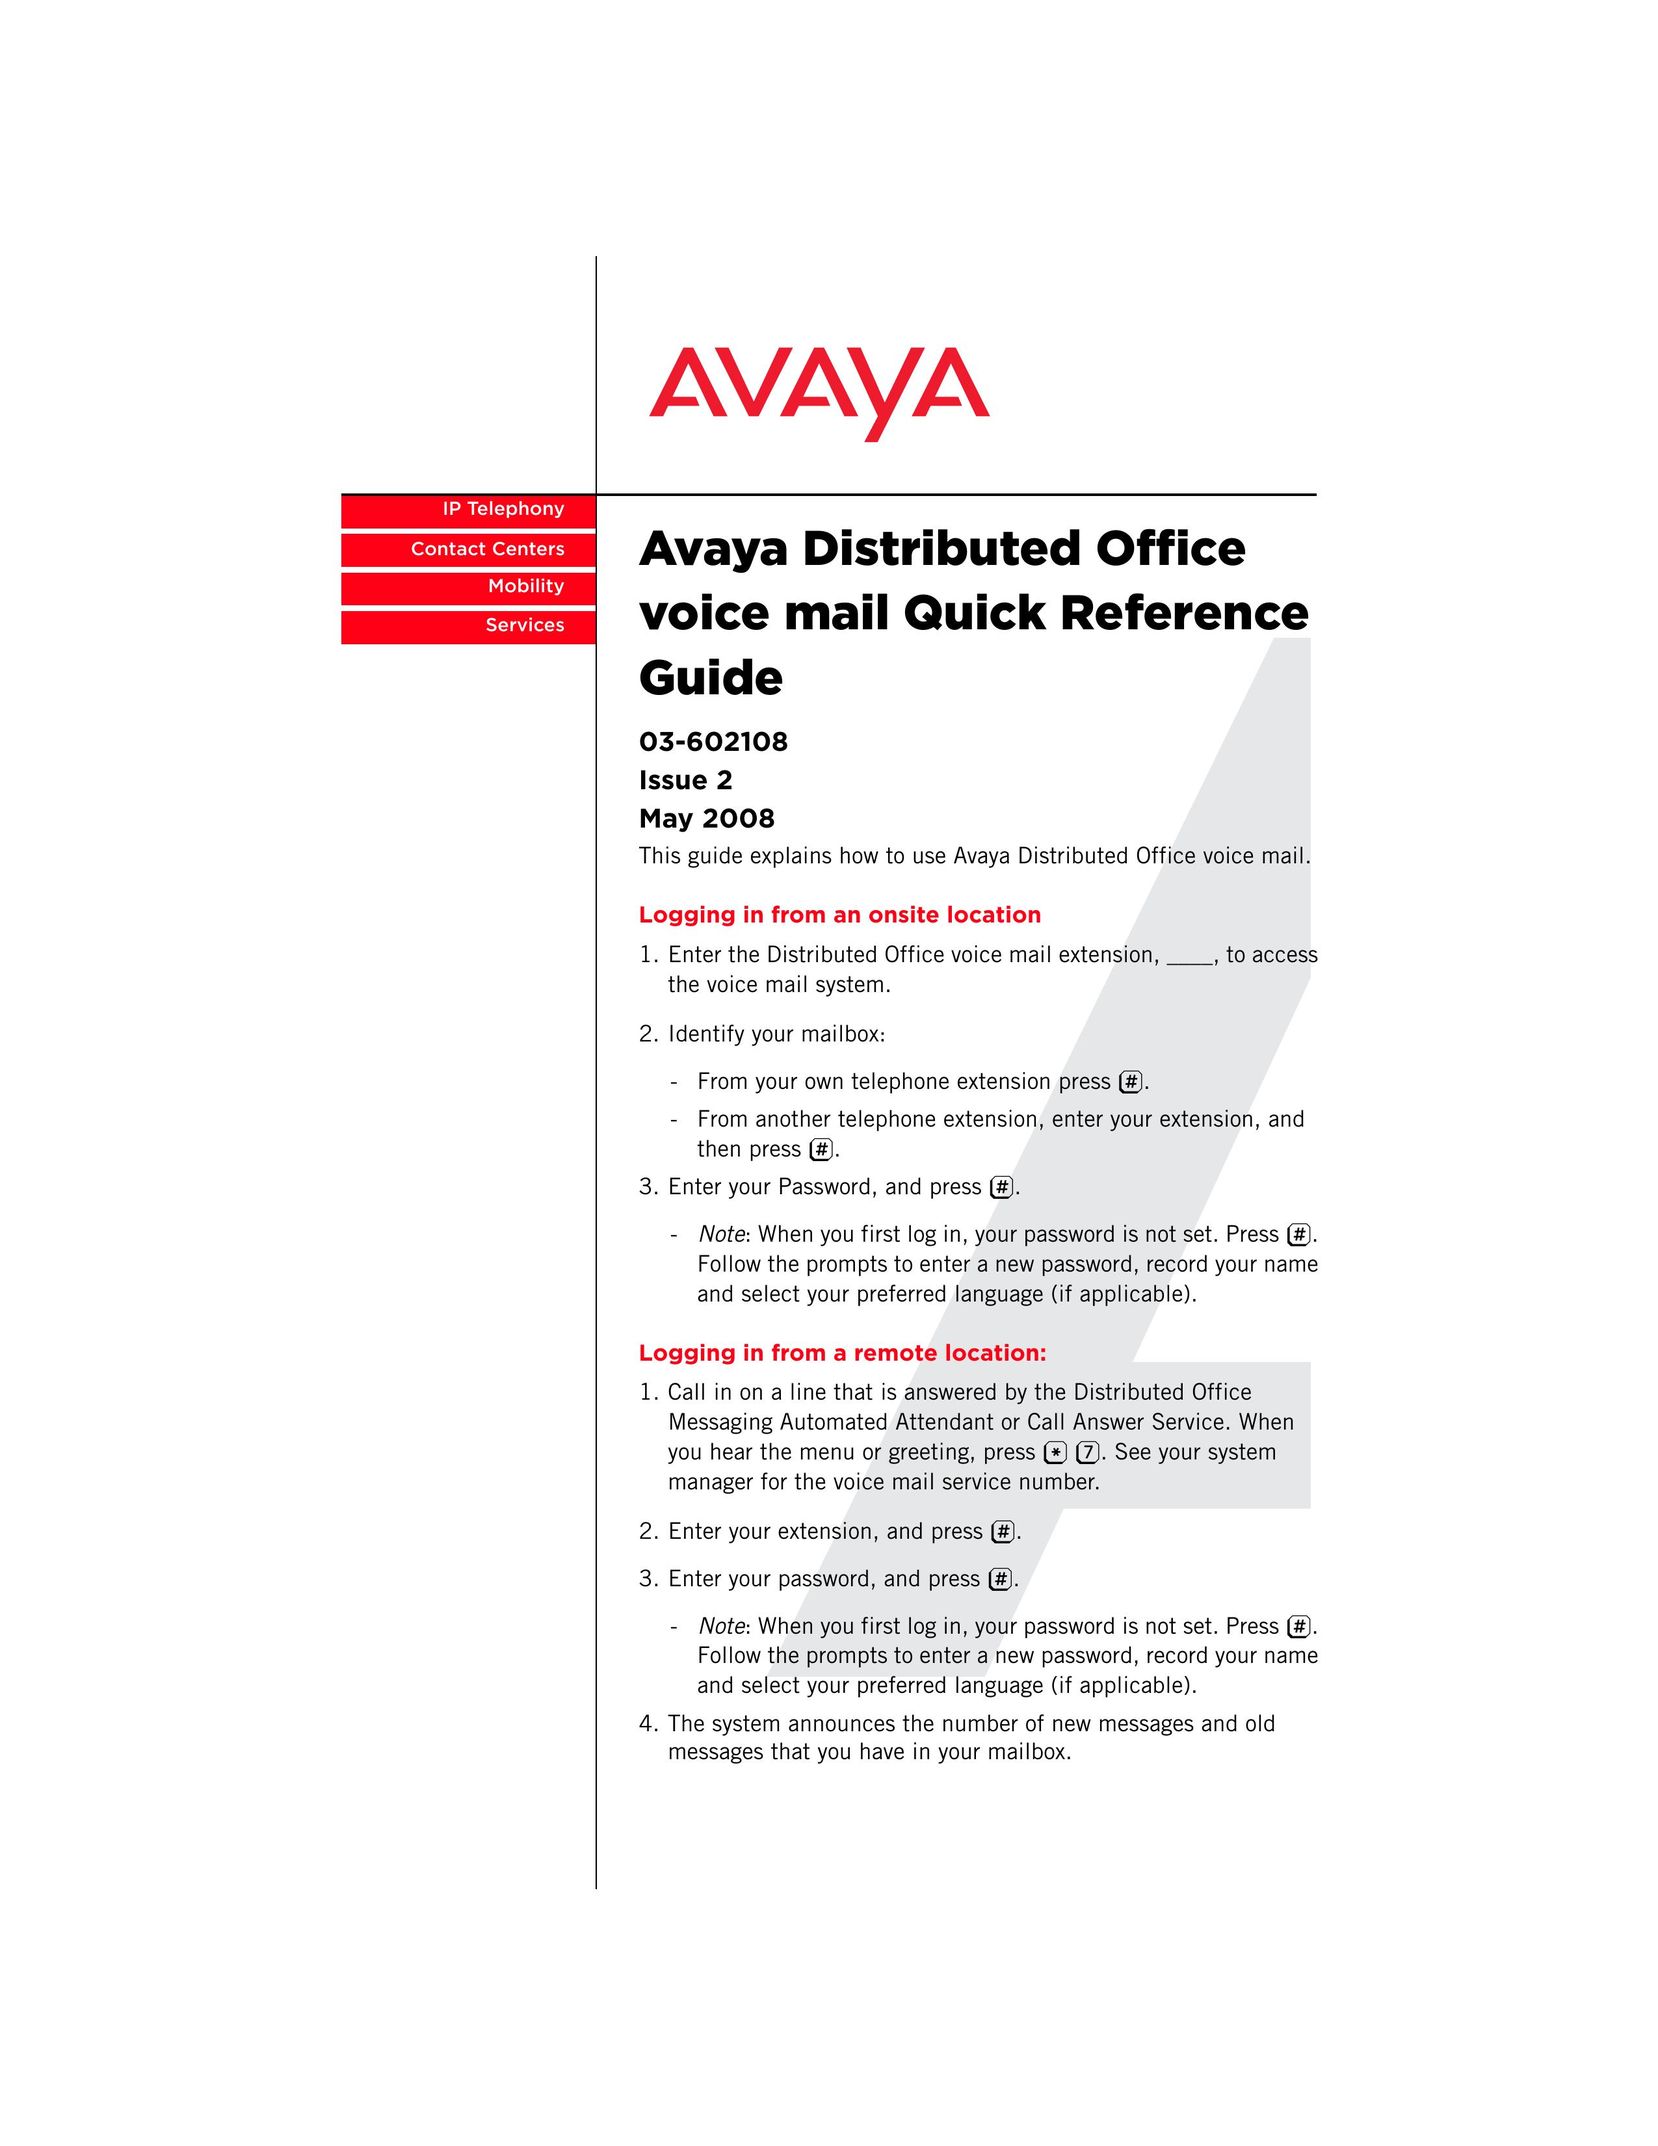 Avaya Distributed Office Voice Mail Answering Machine User Manual